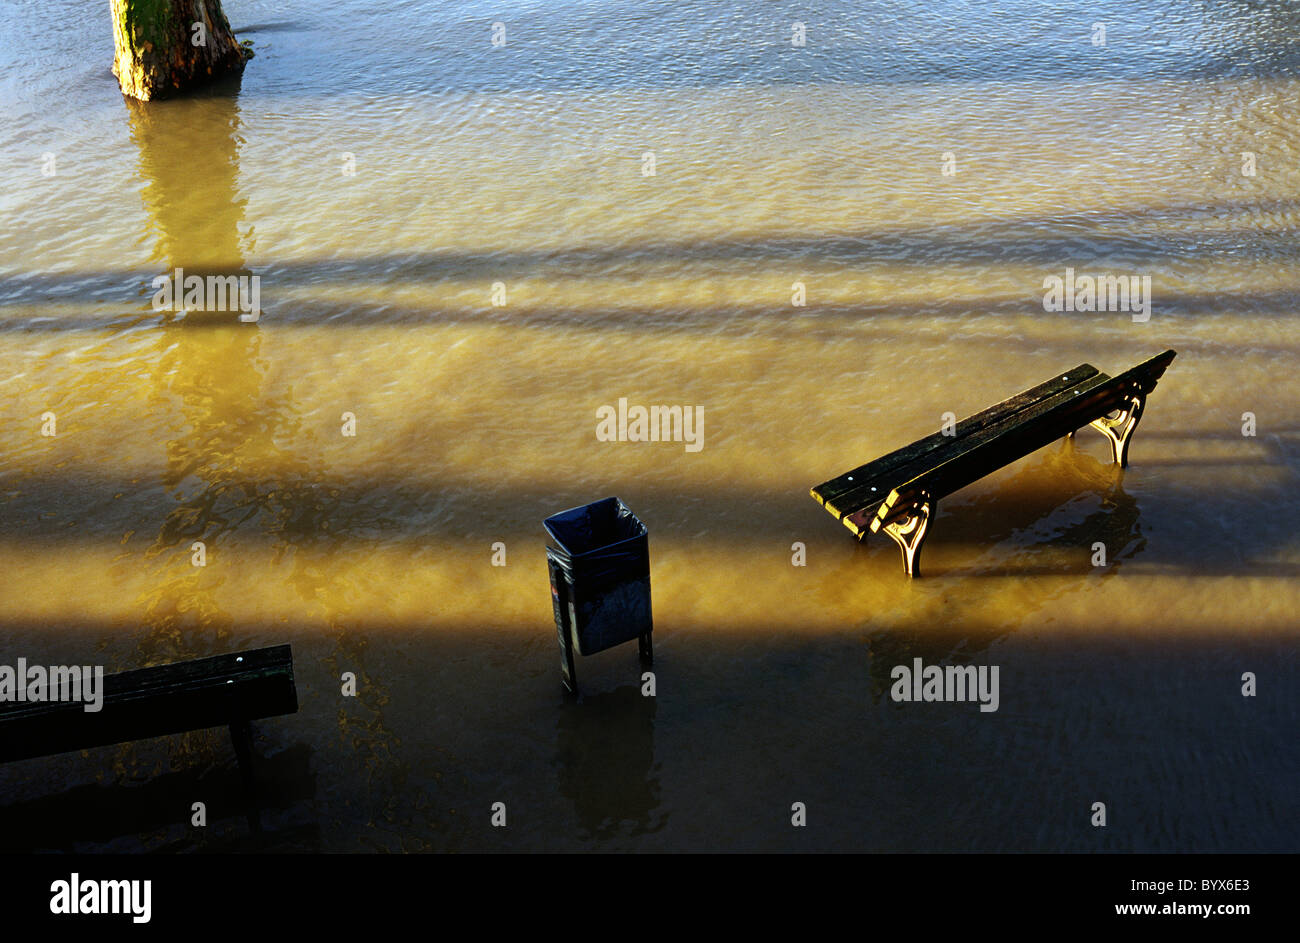 Melting snow in the south has caused the river Main to swell and flood its riverside promenade in the German city of Frankfurt. Stock Photo